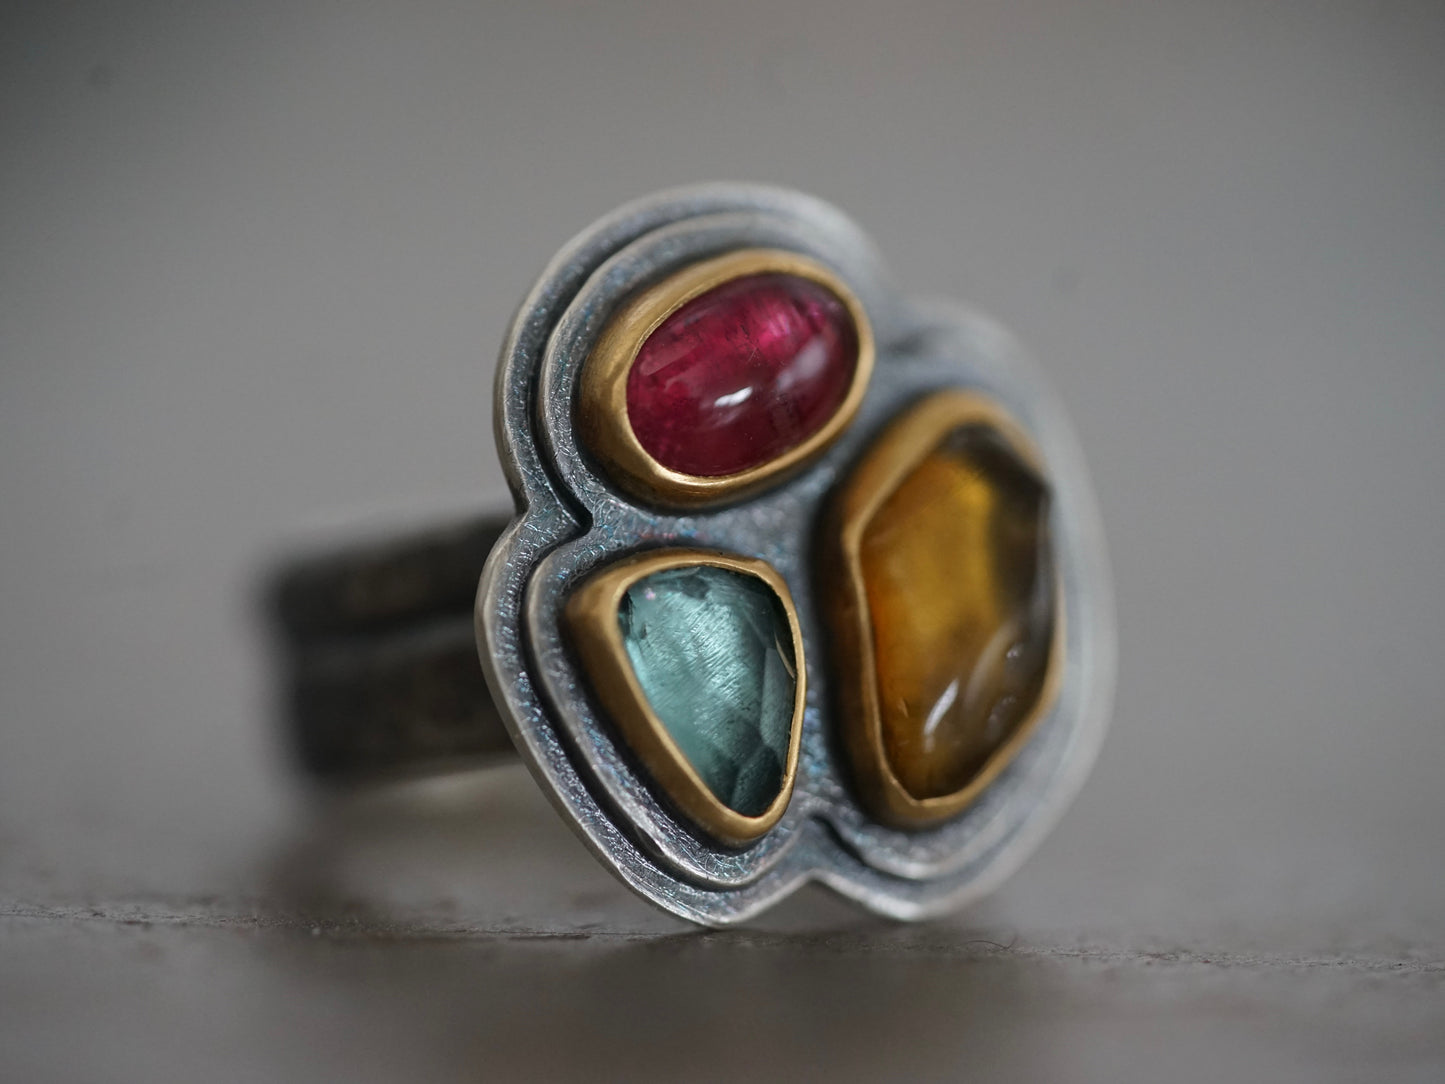 Exquisite, colorful tourmaline statement ring, size 7.25